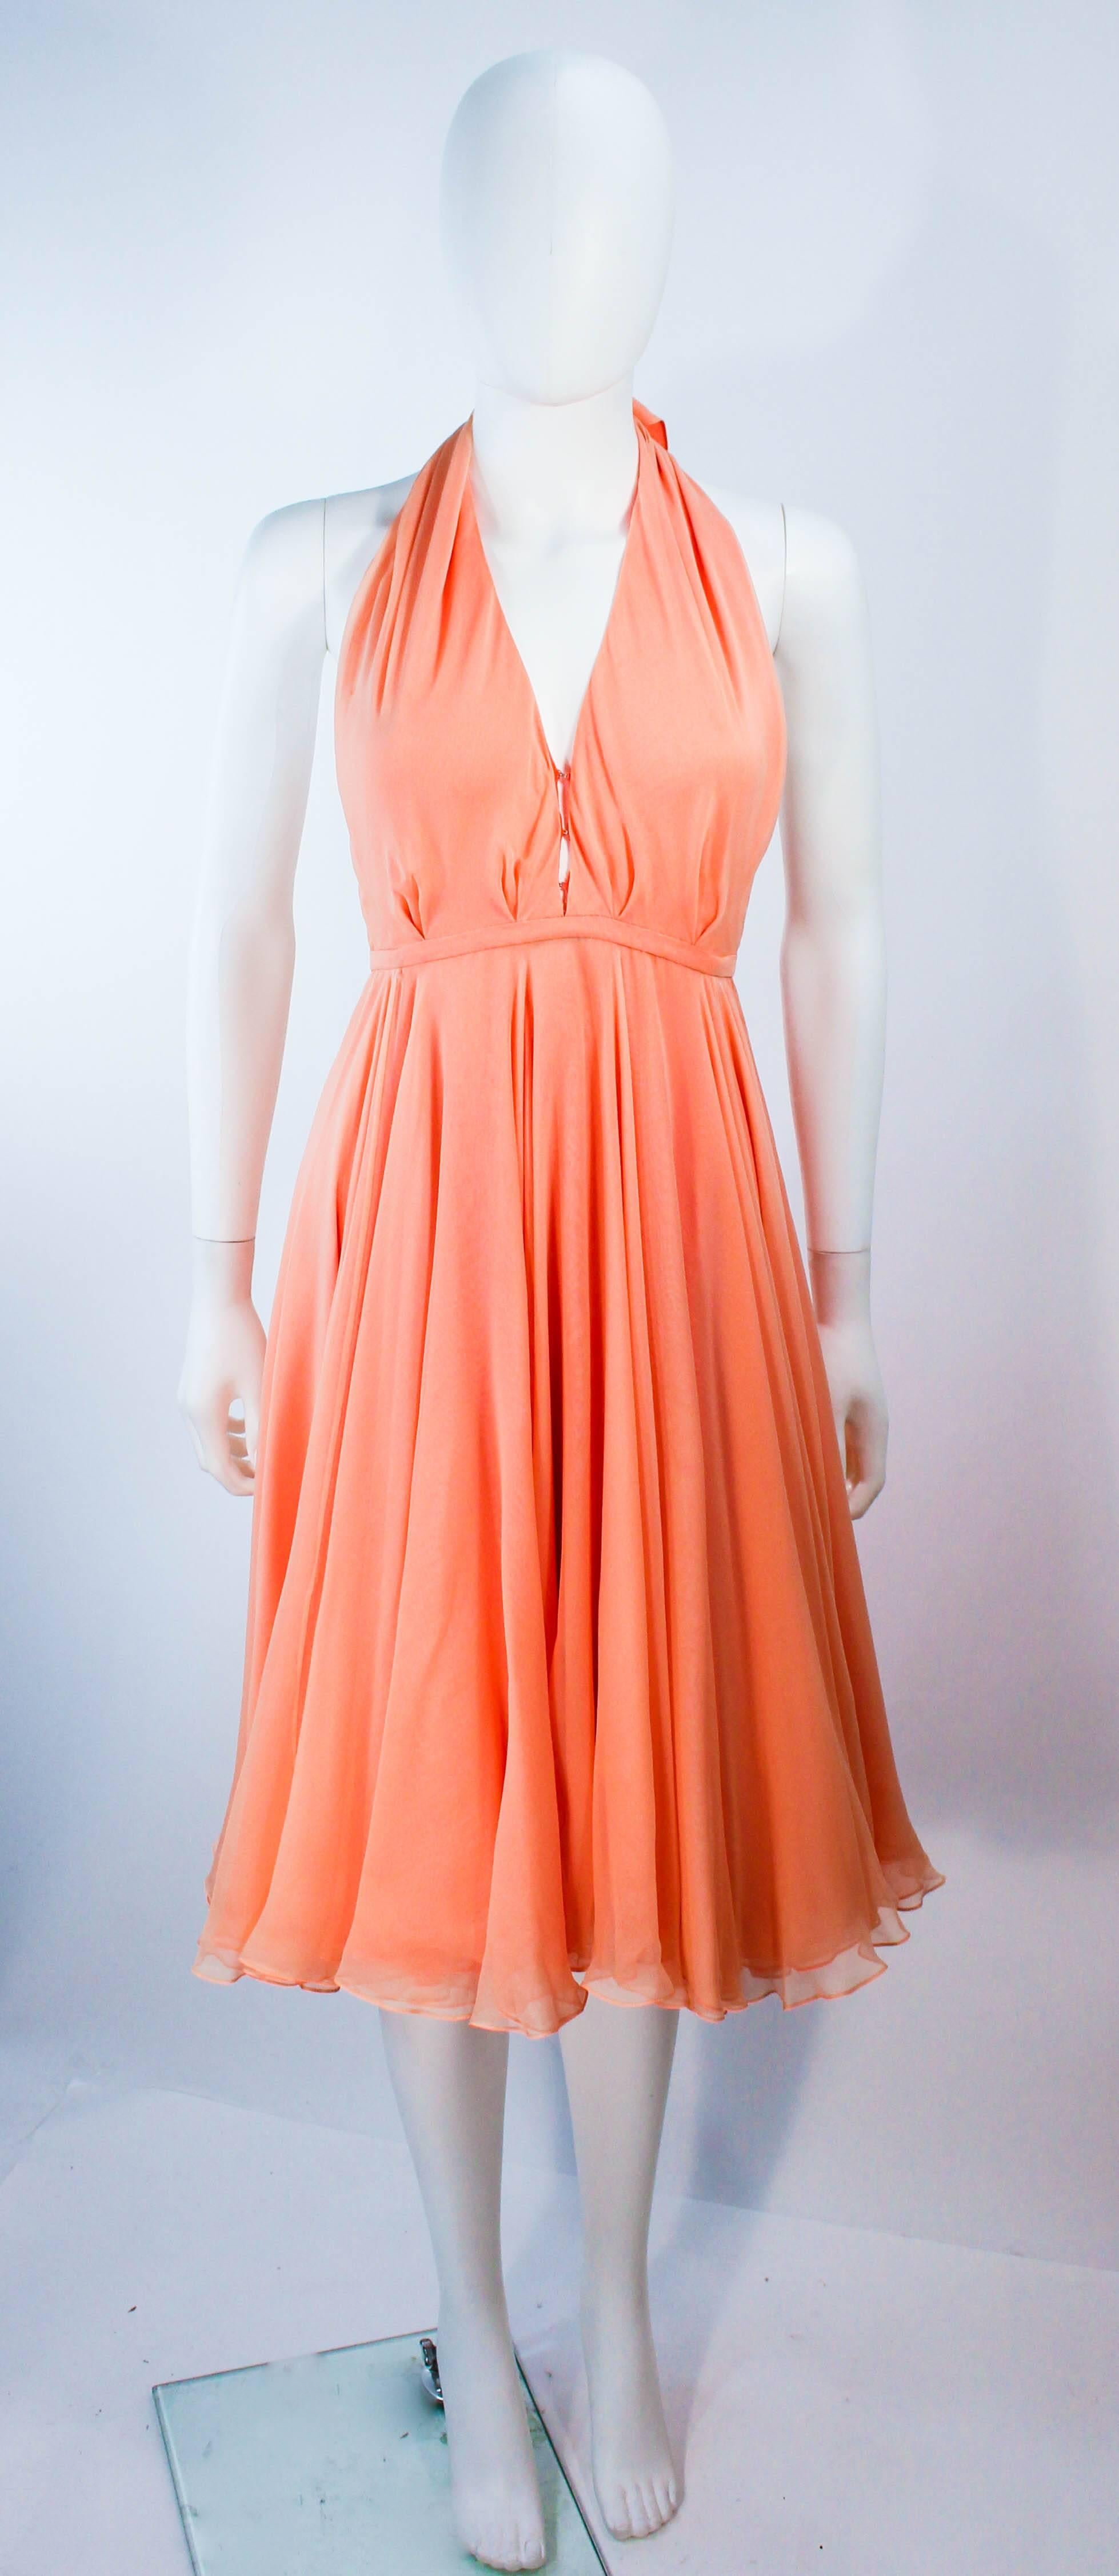 This vintage 1970's Halston cocktail dress is composed of layered silk chiffon in peach and apricot hues. There are center front hooks and center back snap closures. The long drapes can be fashioned in a variety of ways. In excellent vintage